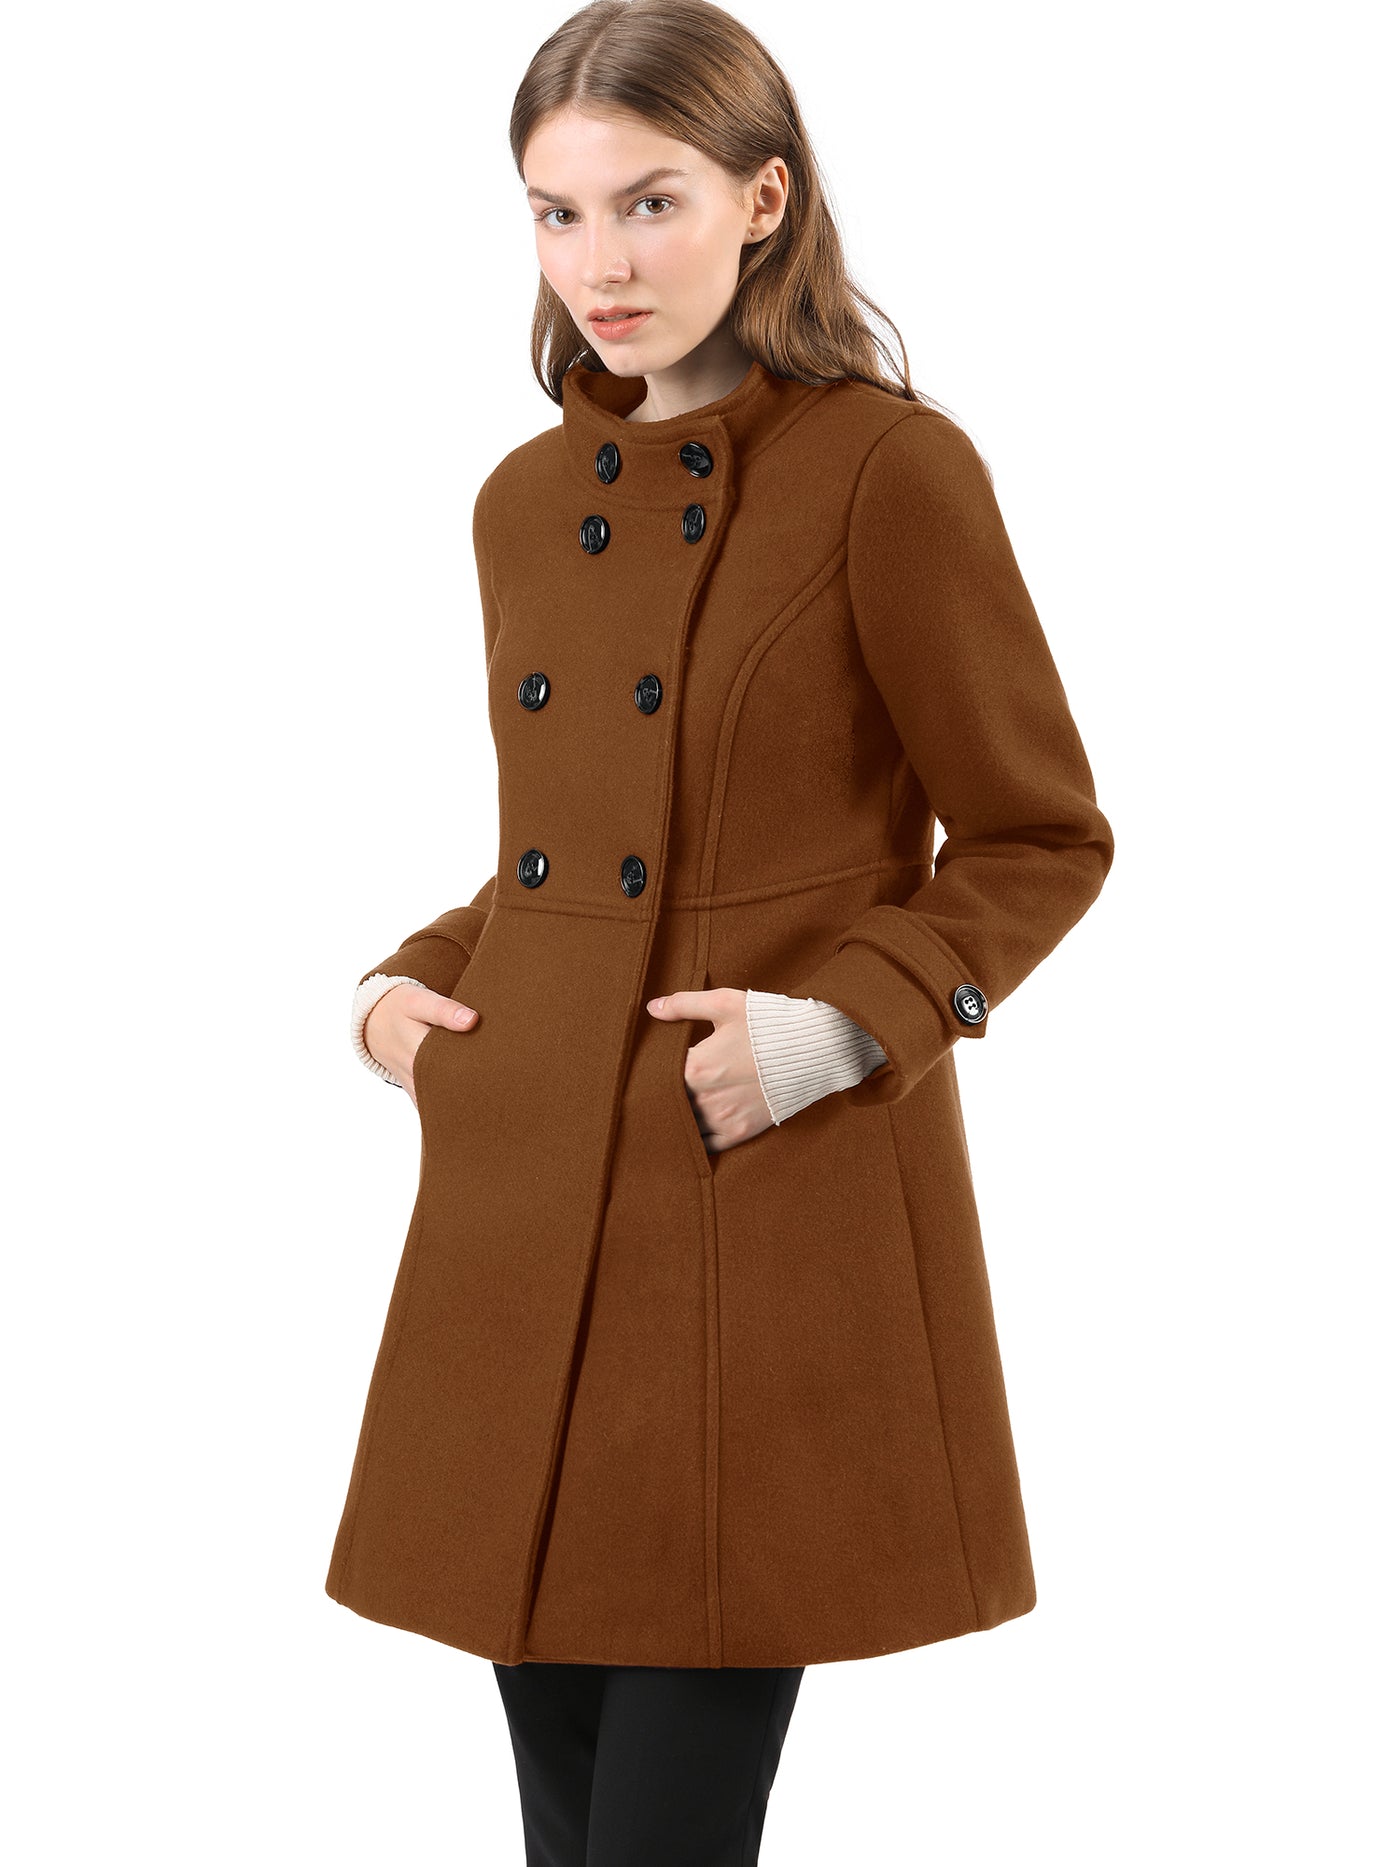 Allegra K Stand Collar Double Breasted Slant Pockets Trendy Outwear Winter Coat